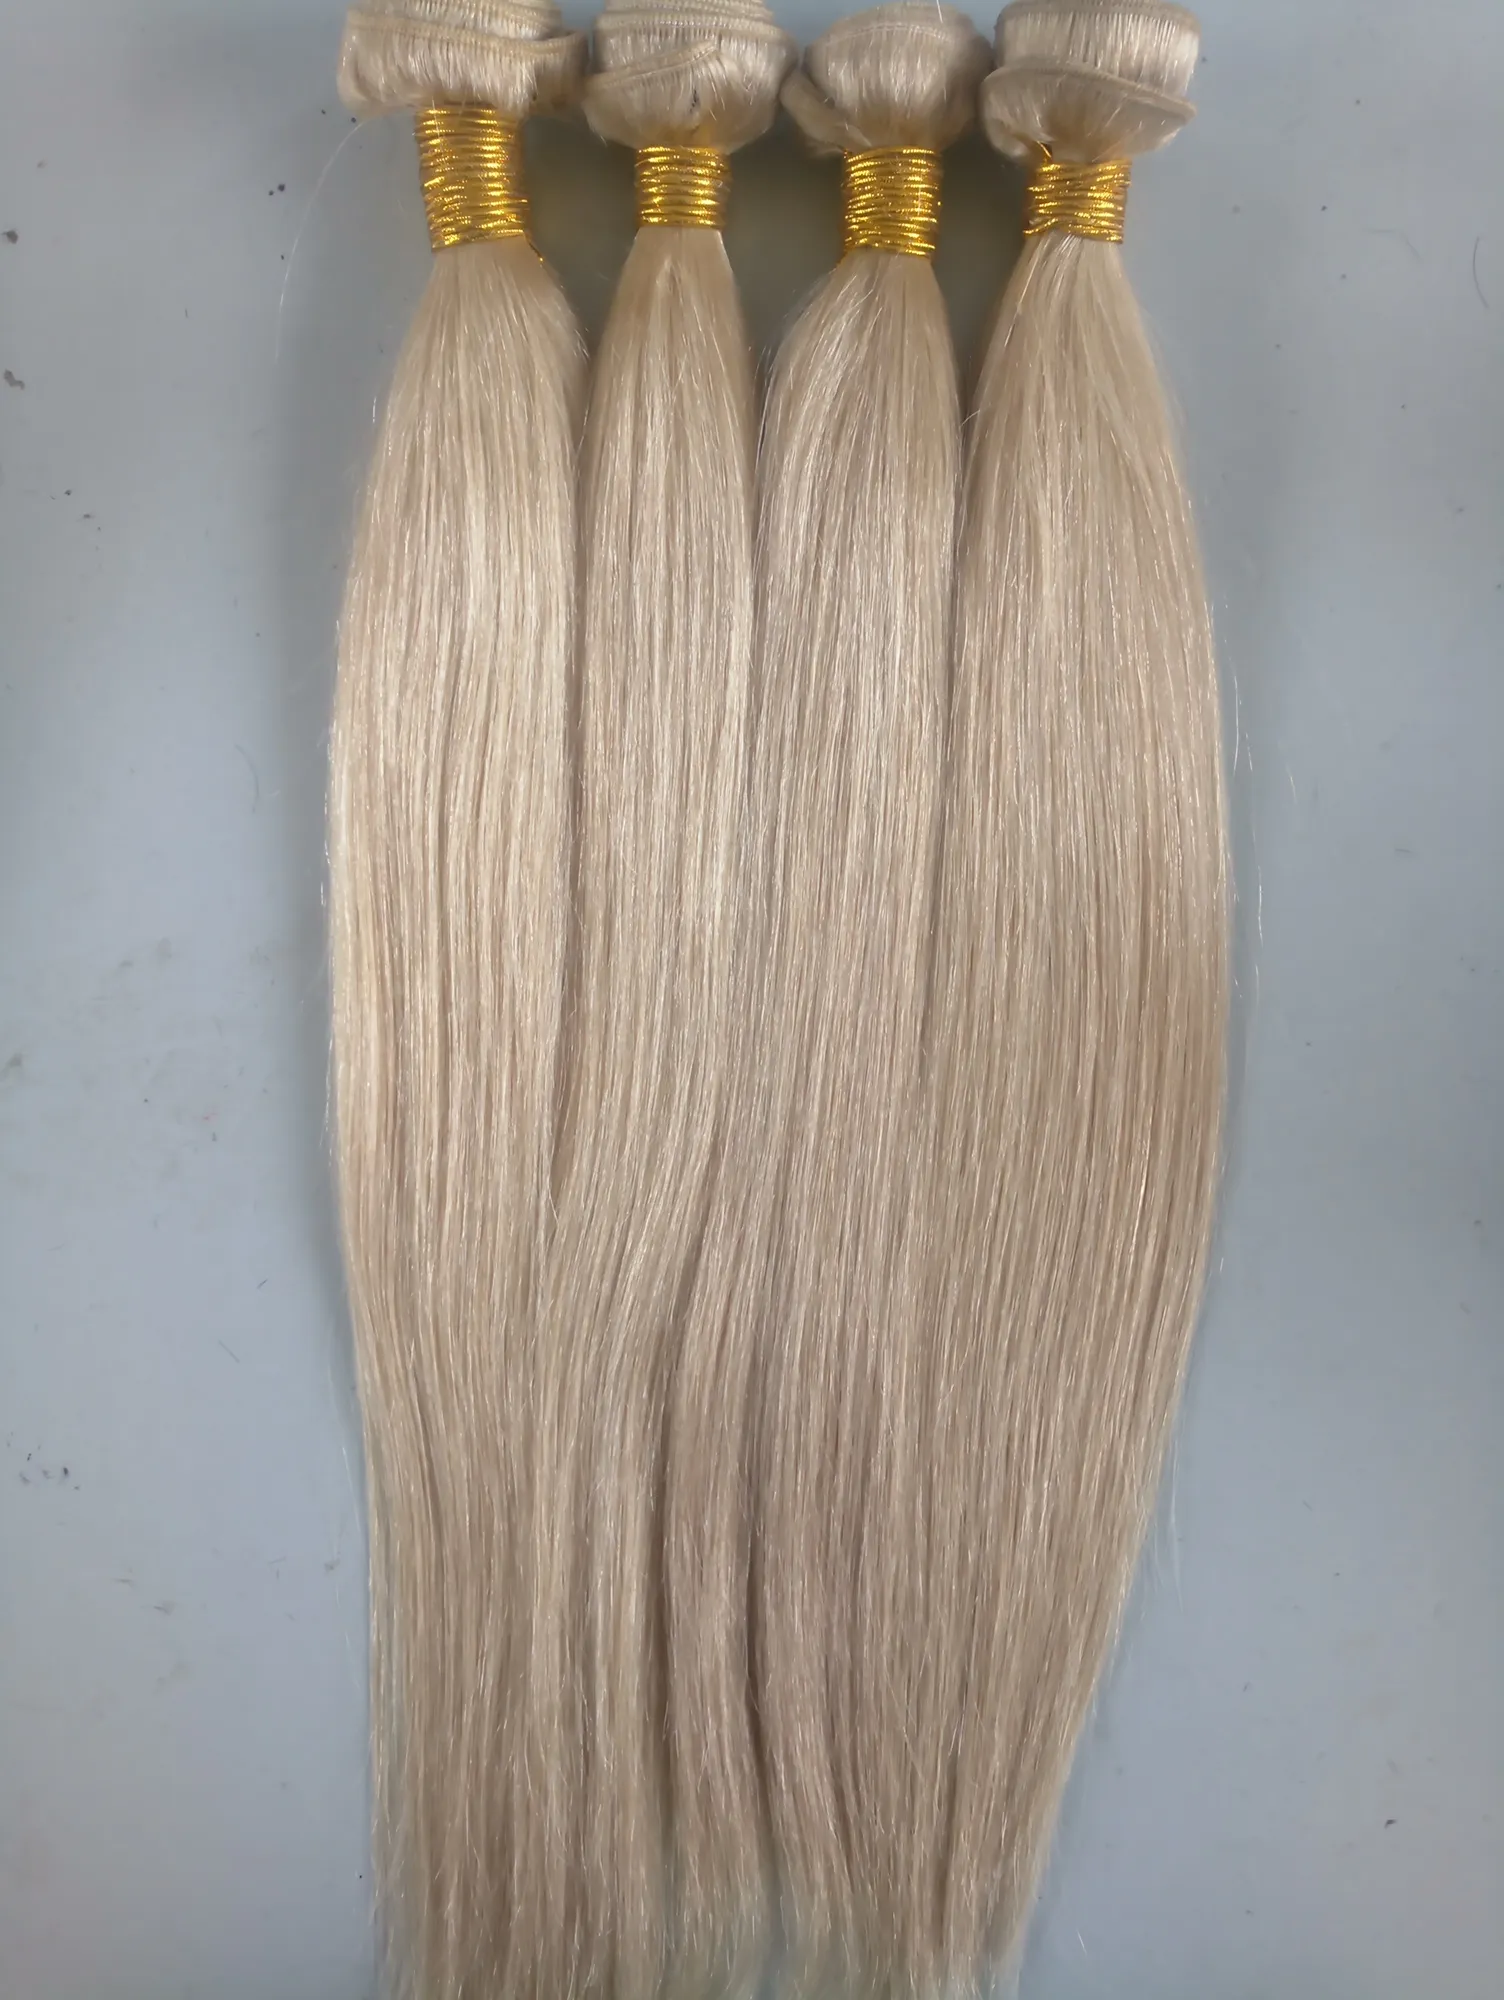 Brazilian Human Virgin RemyStraight Hair Weft Blonde Unprocessed Baby Soft Double DrawnHair Extensions 100g/bundle Product